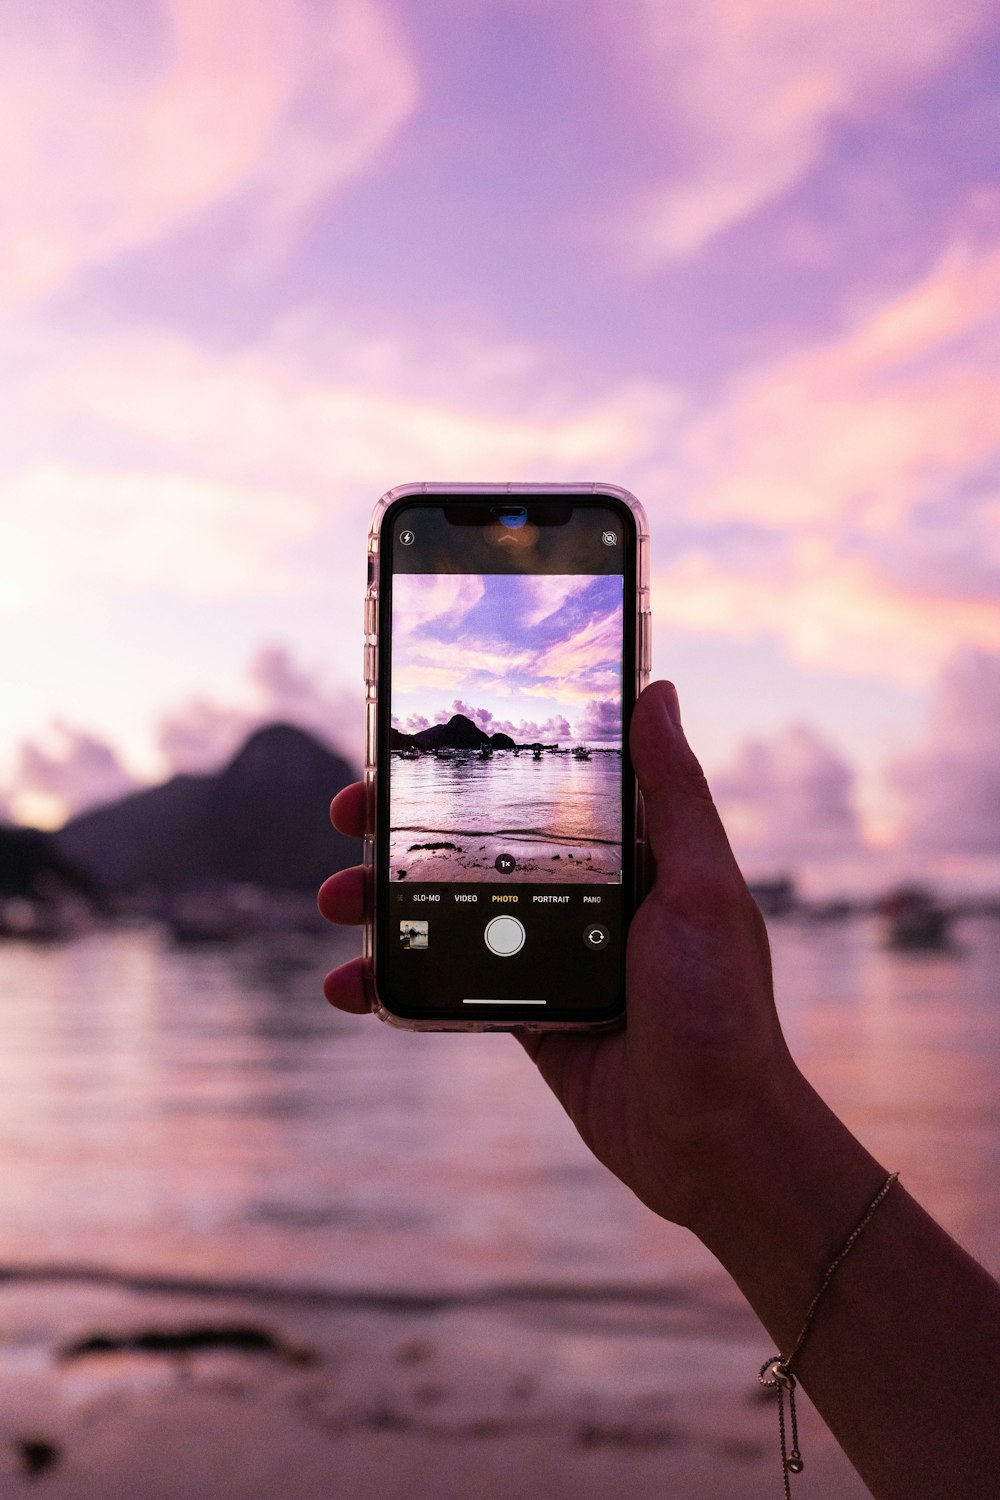 person holding iphone taking photo of body of water during daytime